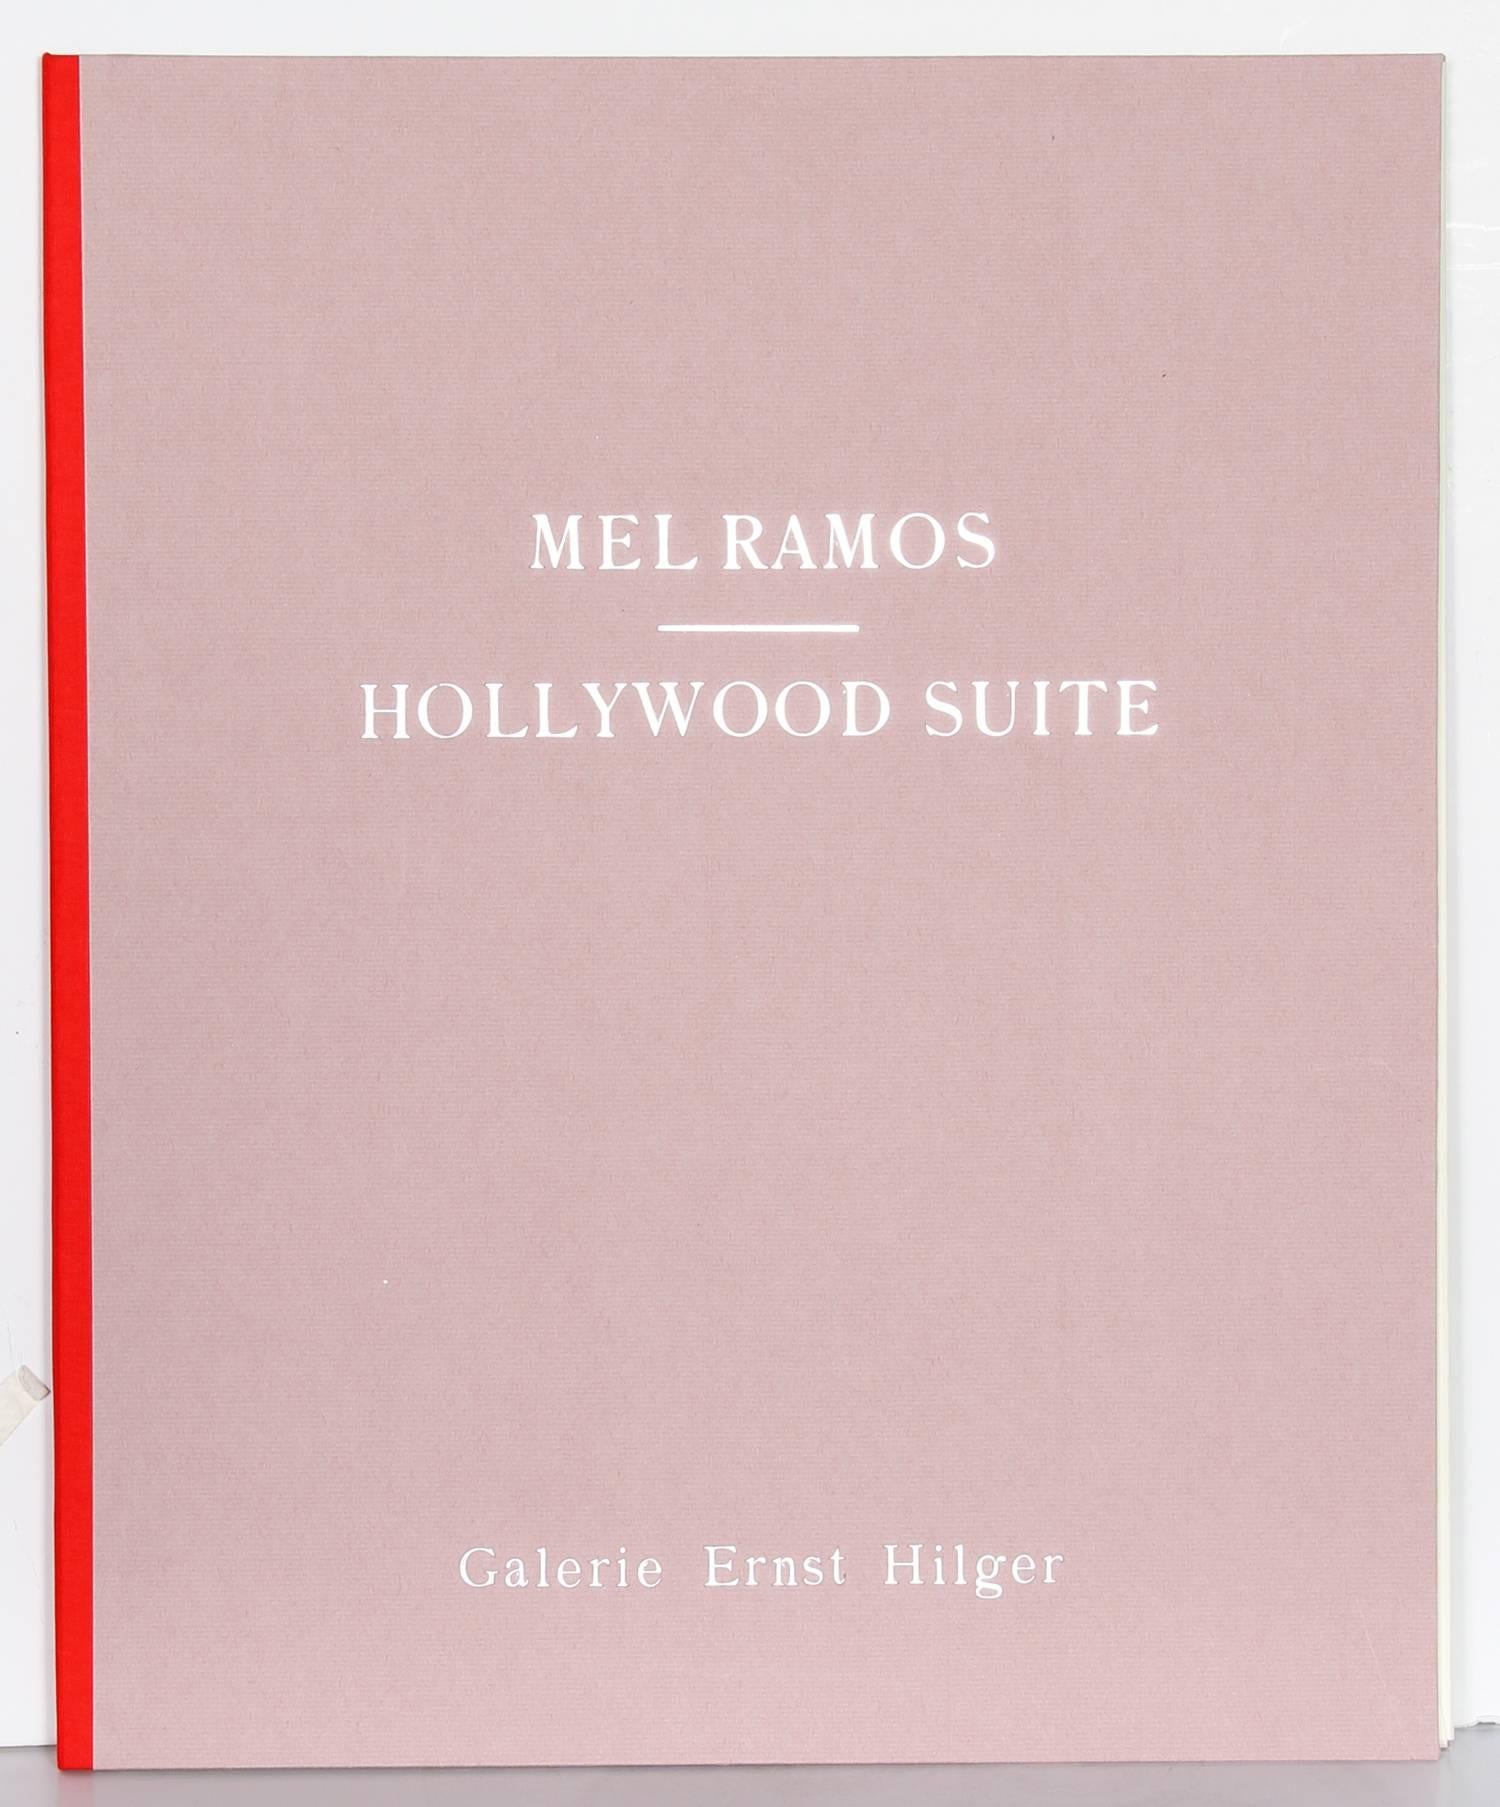 hollywood suite 2000s